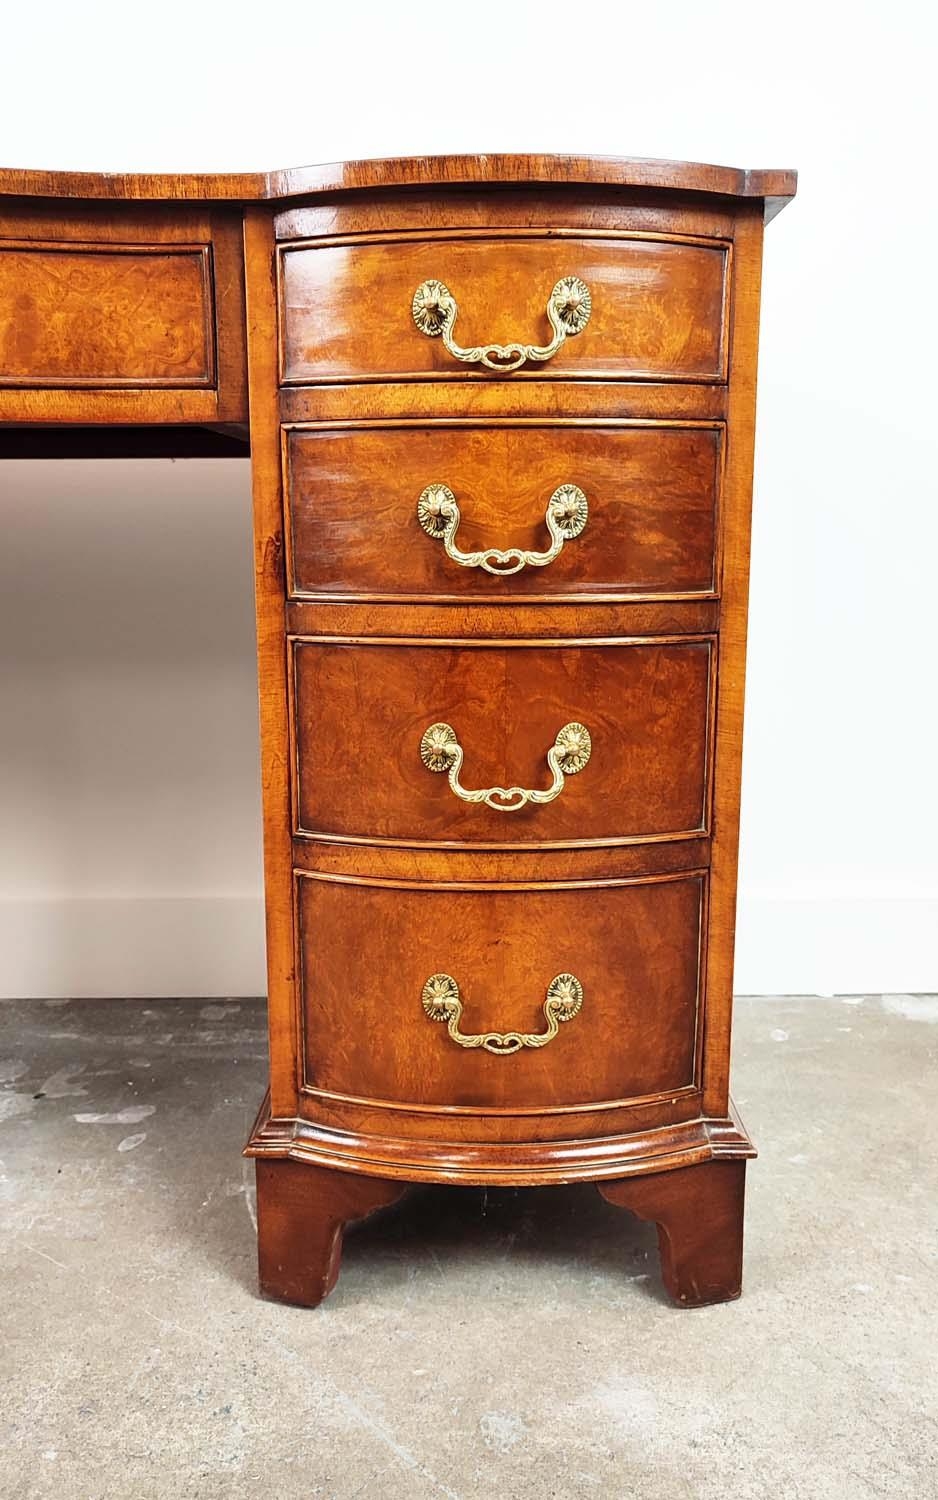 KNEEHOLE DESK, Georgian style, burr walnut with black leather top above nine bowed drawers, 75cm H x - Image 3 of 10